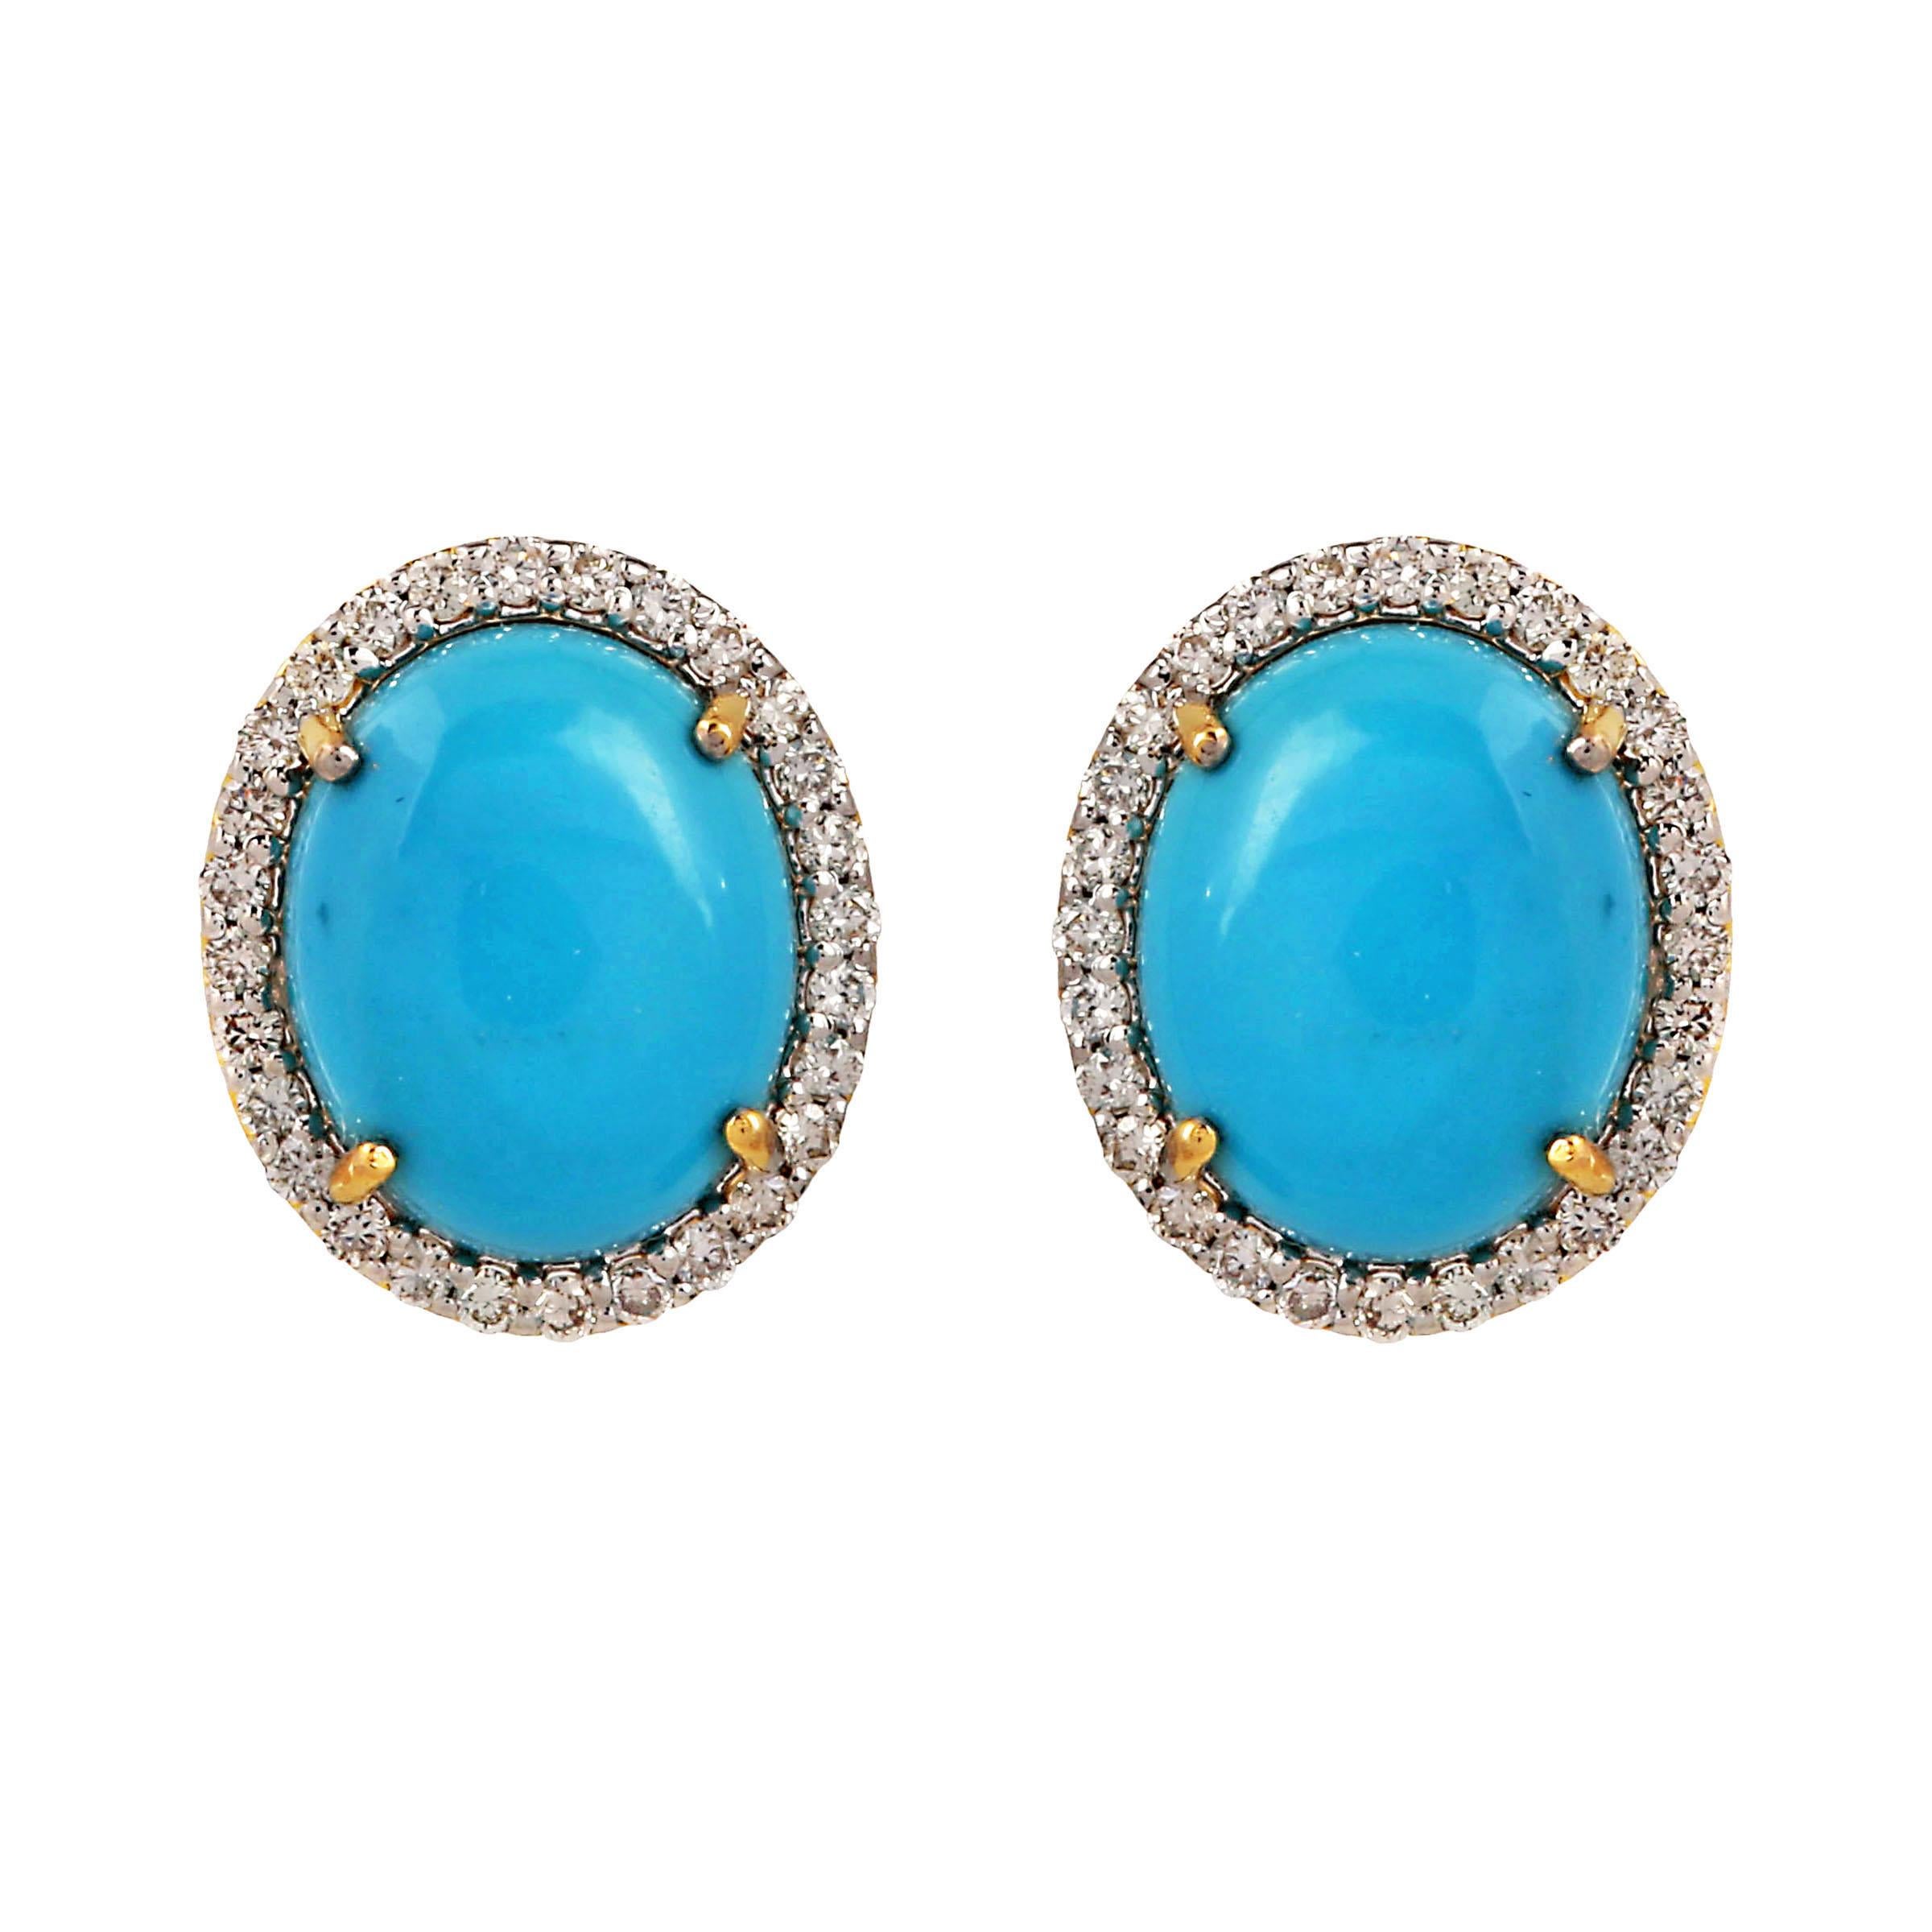 These earrings are made with beautiful, uncut turquoise and diamonds. The diamonds are pave set in 14K yellow gold. These earrings are simple and elegant and would be perfect everyday jewelry bringing shine to the wearer with their feminine